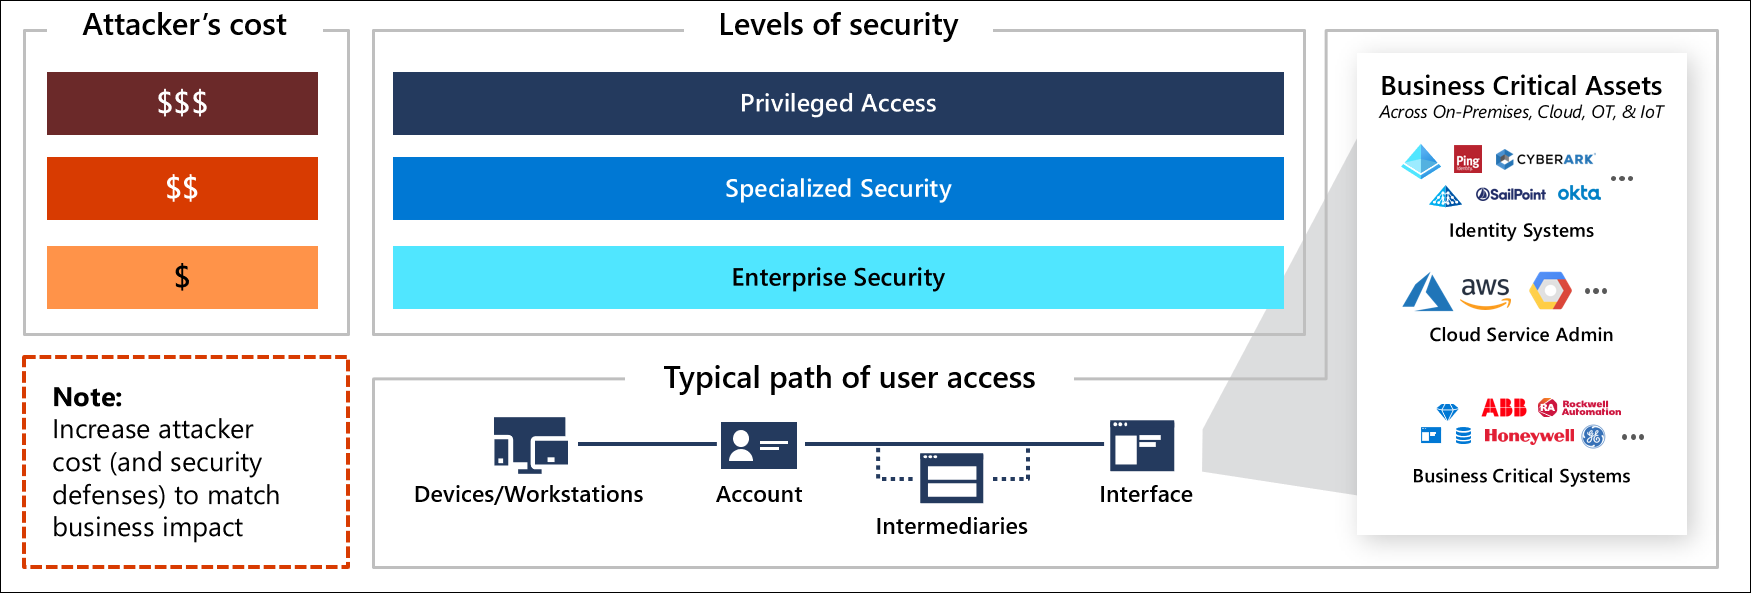 Increase attacker cost with each level of security investment